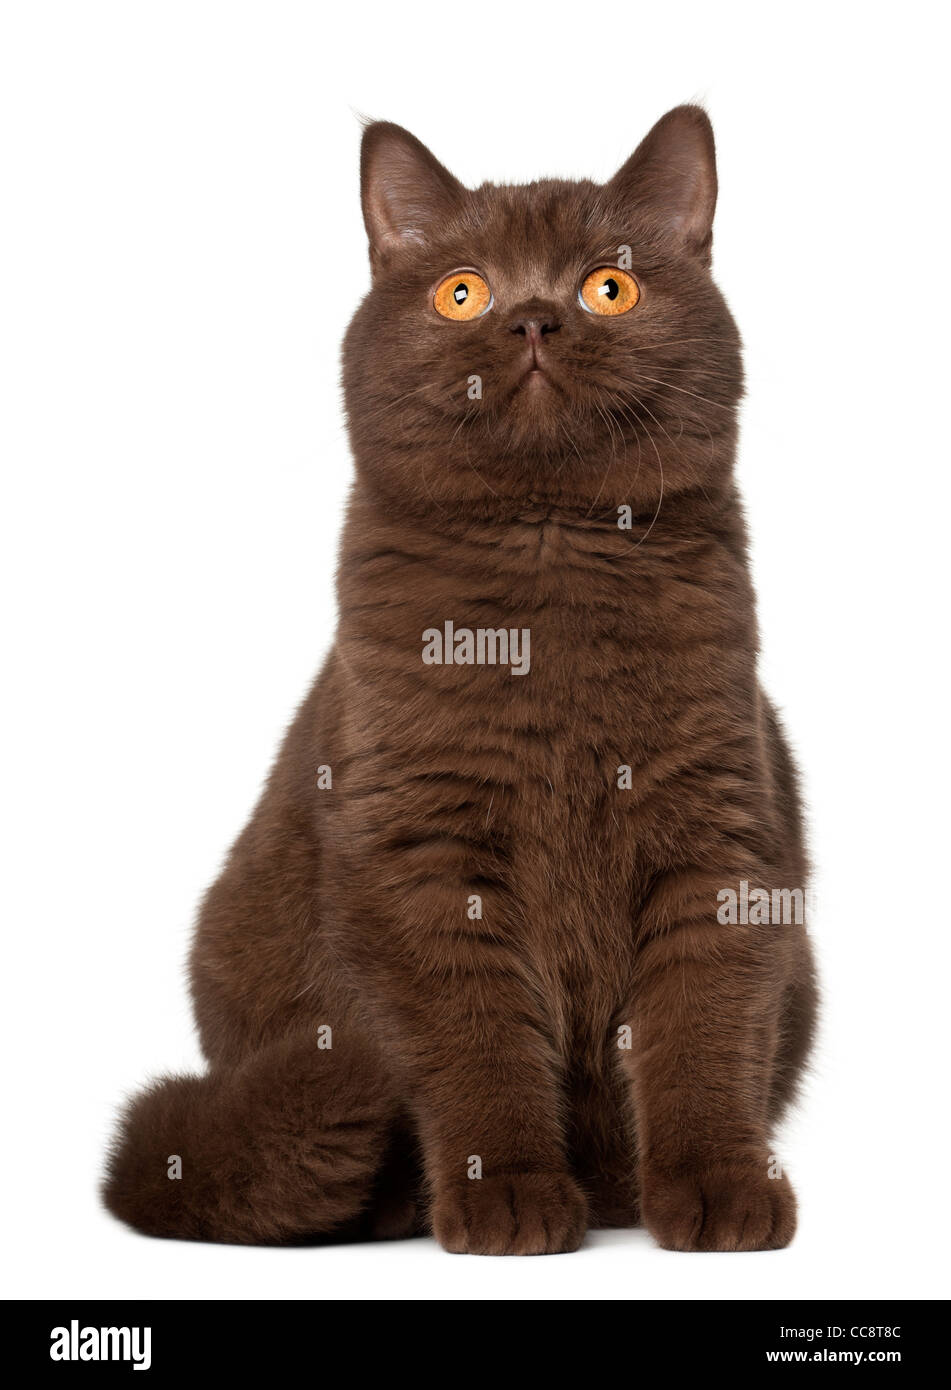 British shorthair cat sitting in front of white background Banque D'Images